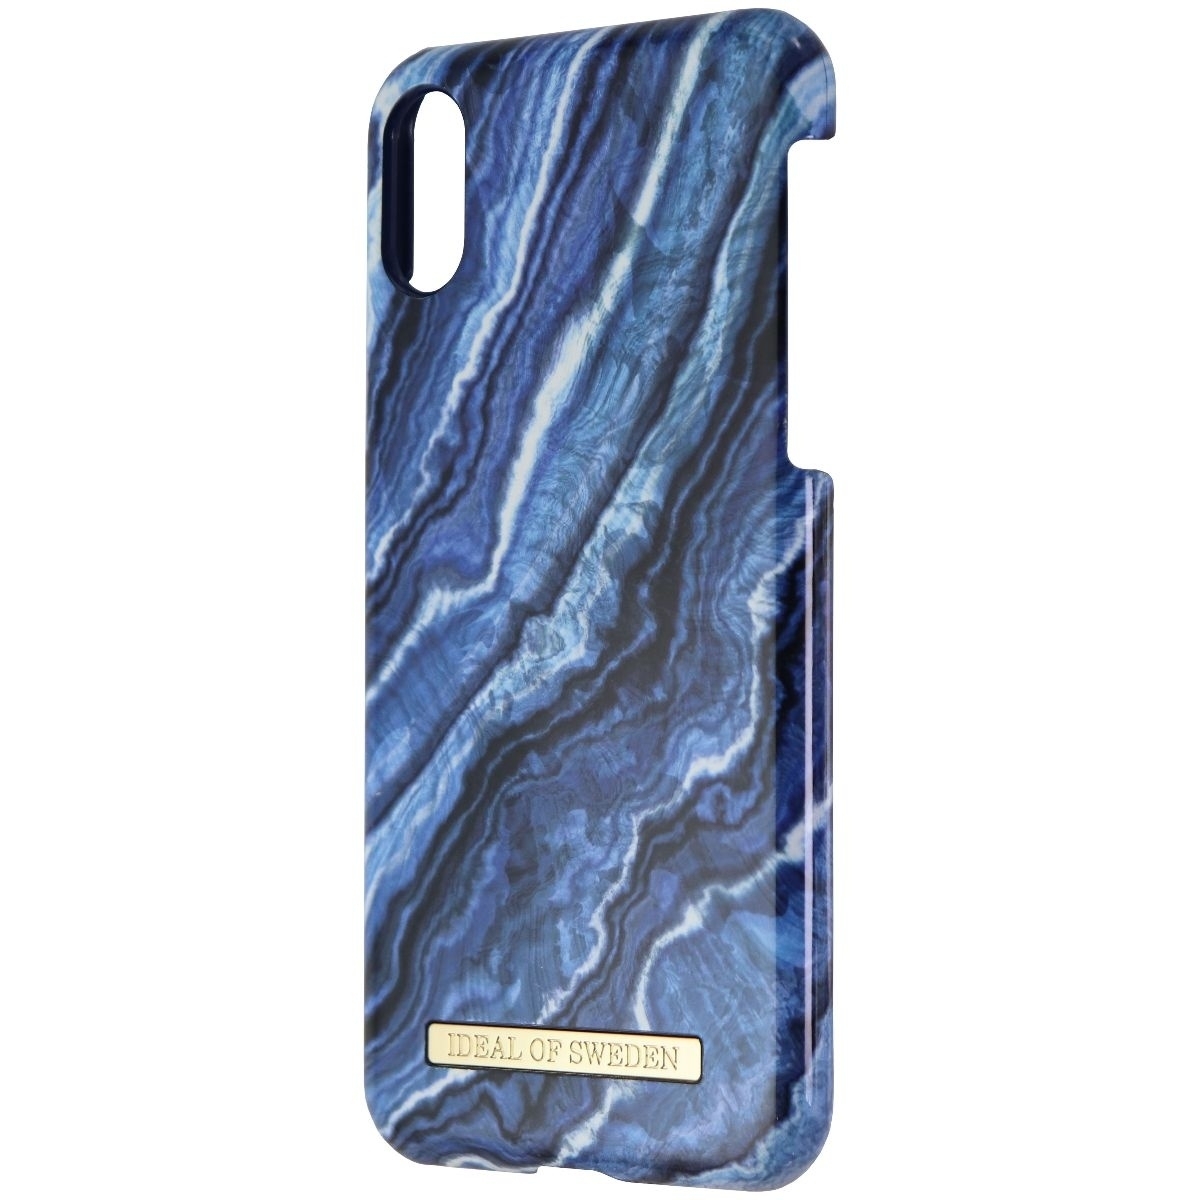 IDeal Of Sweden Hard Case For Apple IPhone Xs And X - Indigo Swirl